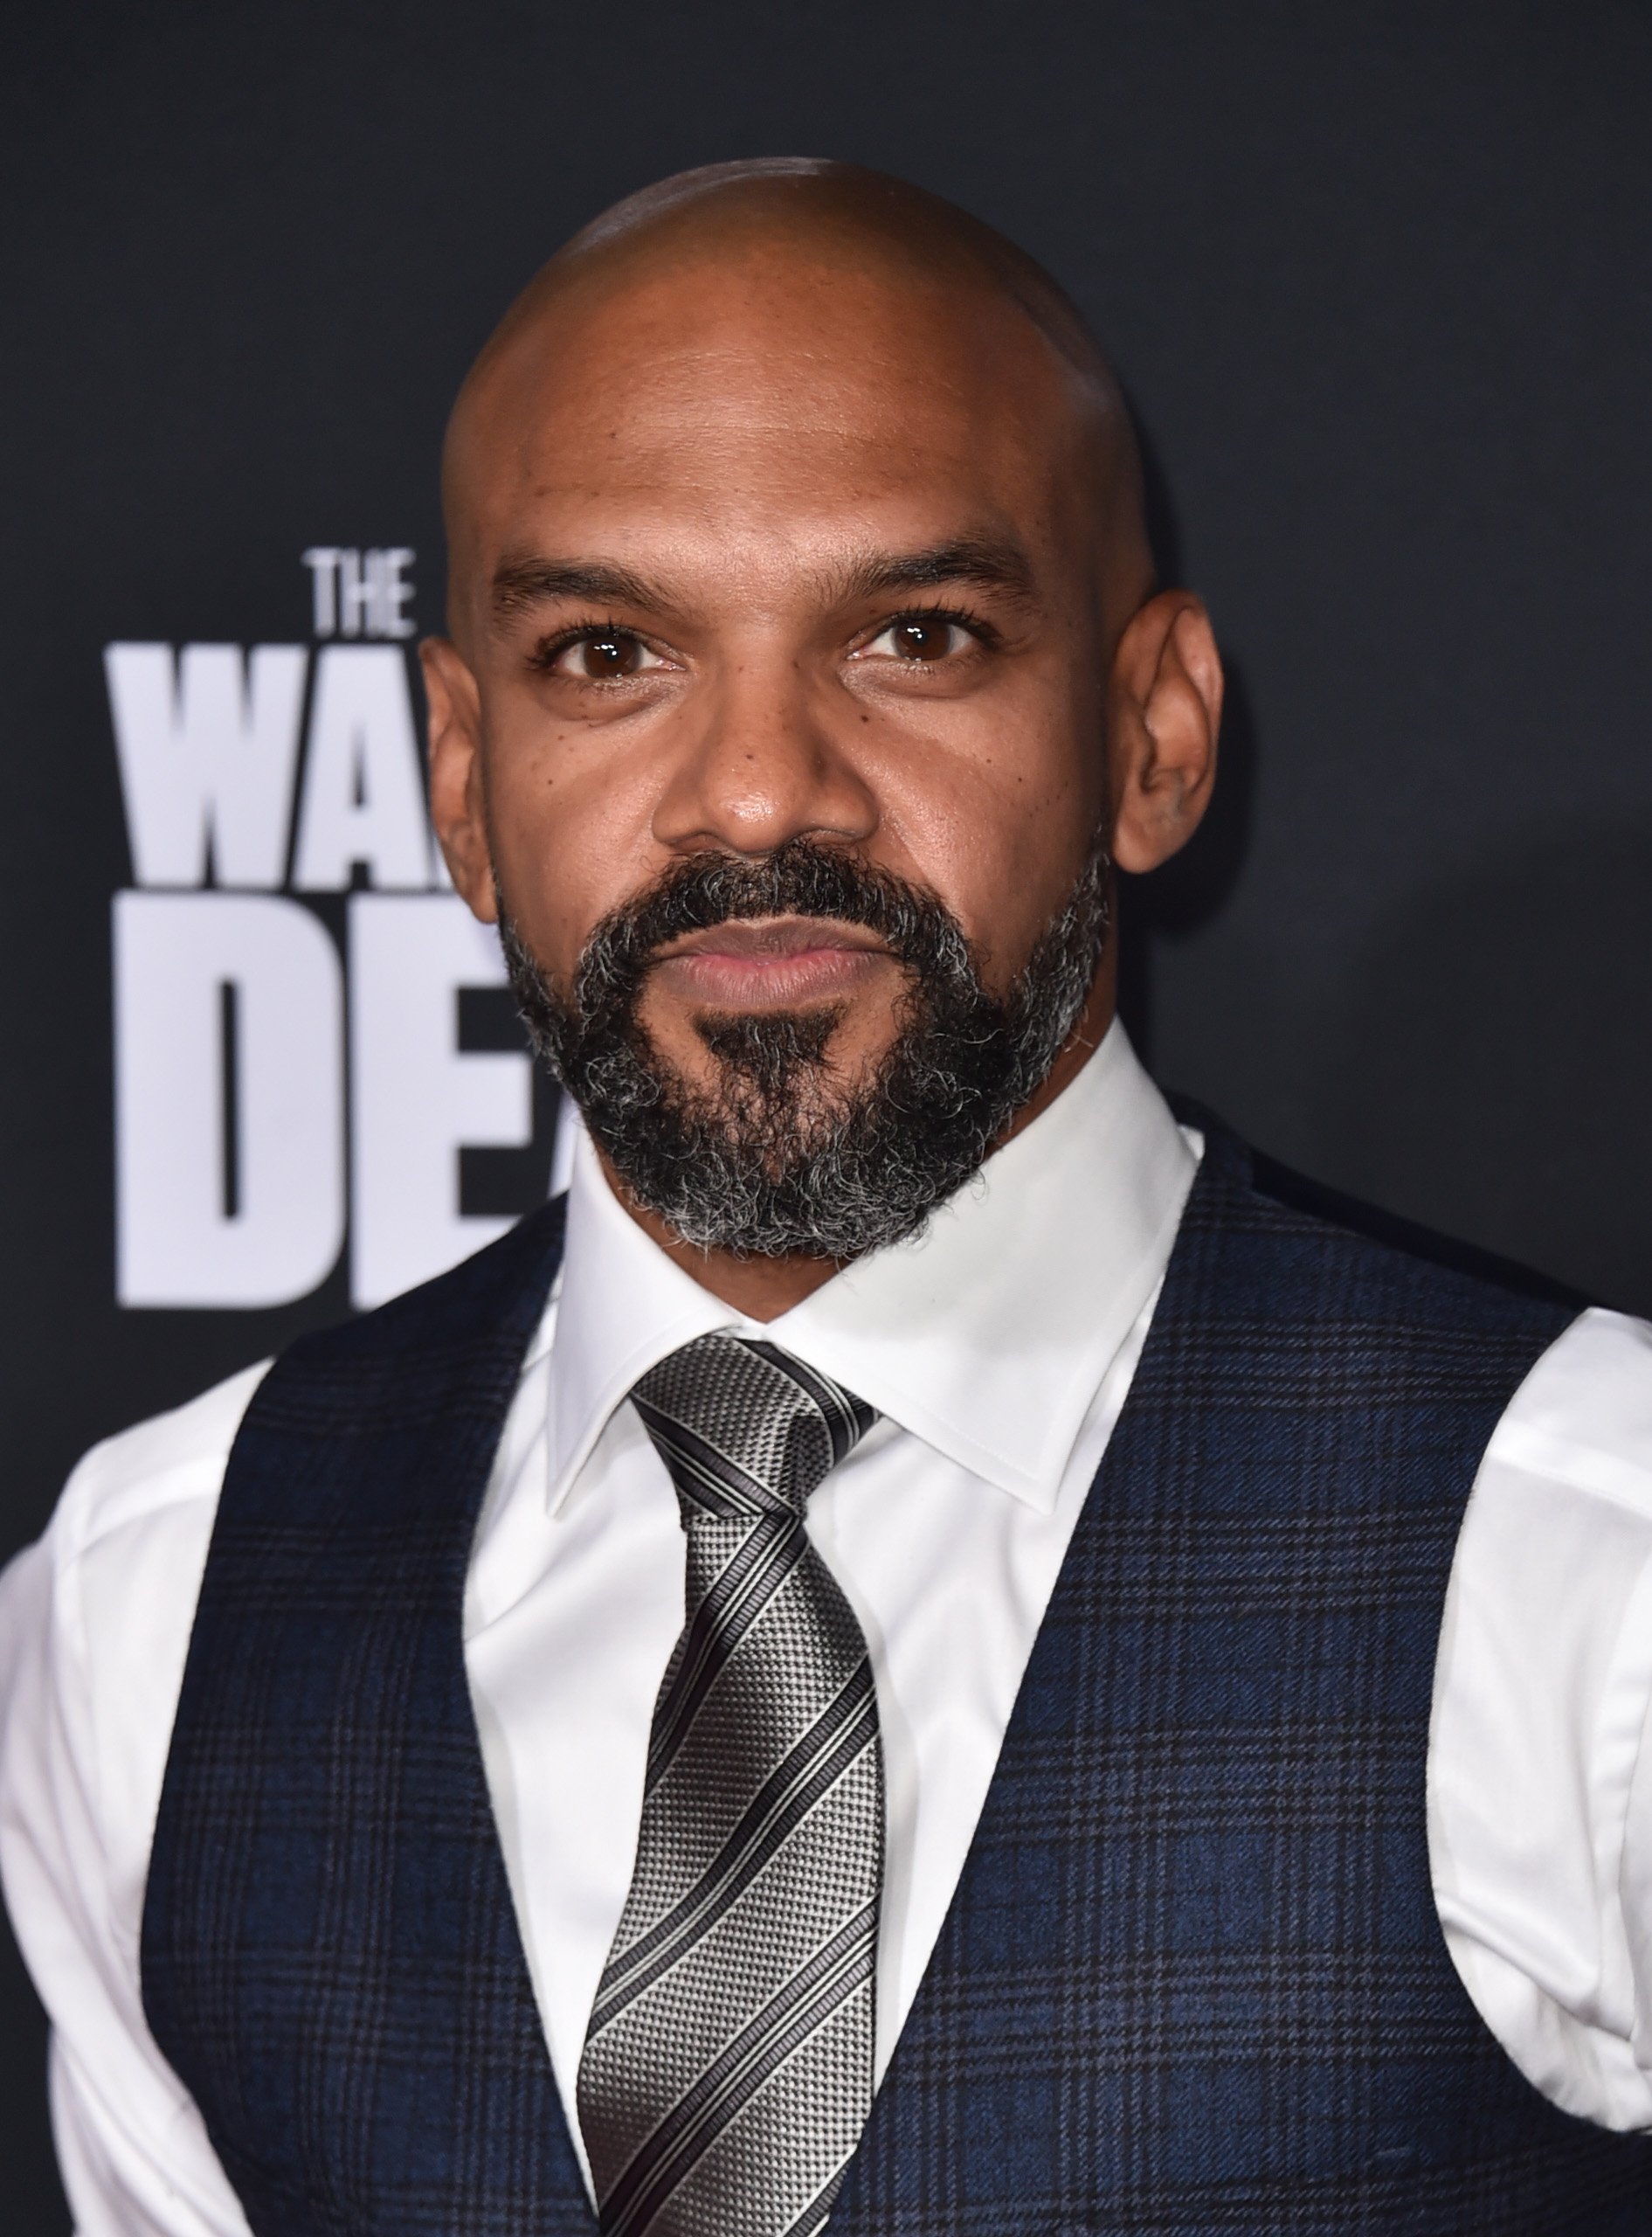 Khary Payton attends the Season 10 Special Screening of AMC's "The Walking Dead" at Chinese 6 Theater on September 23, 2019 | Photo: Getty Images